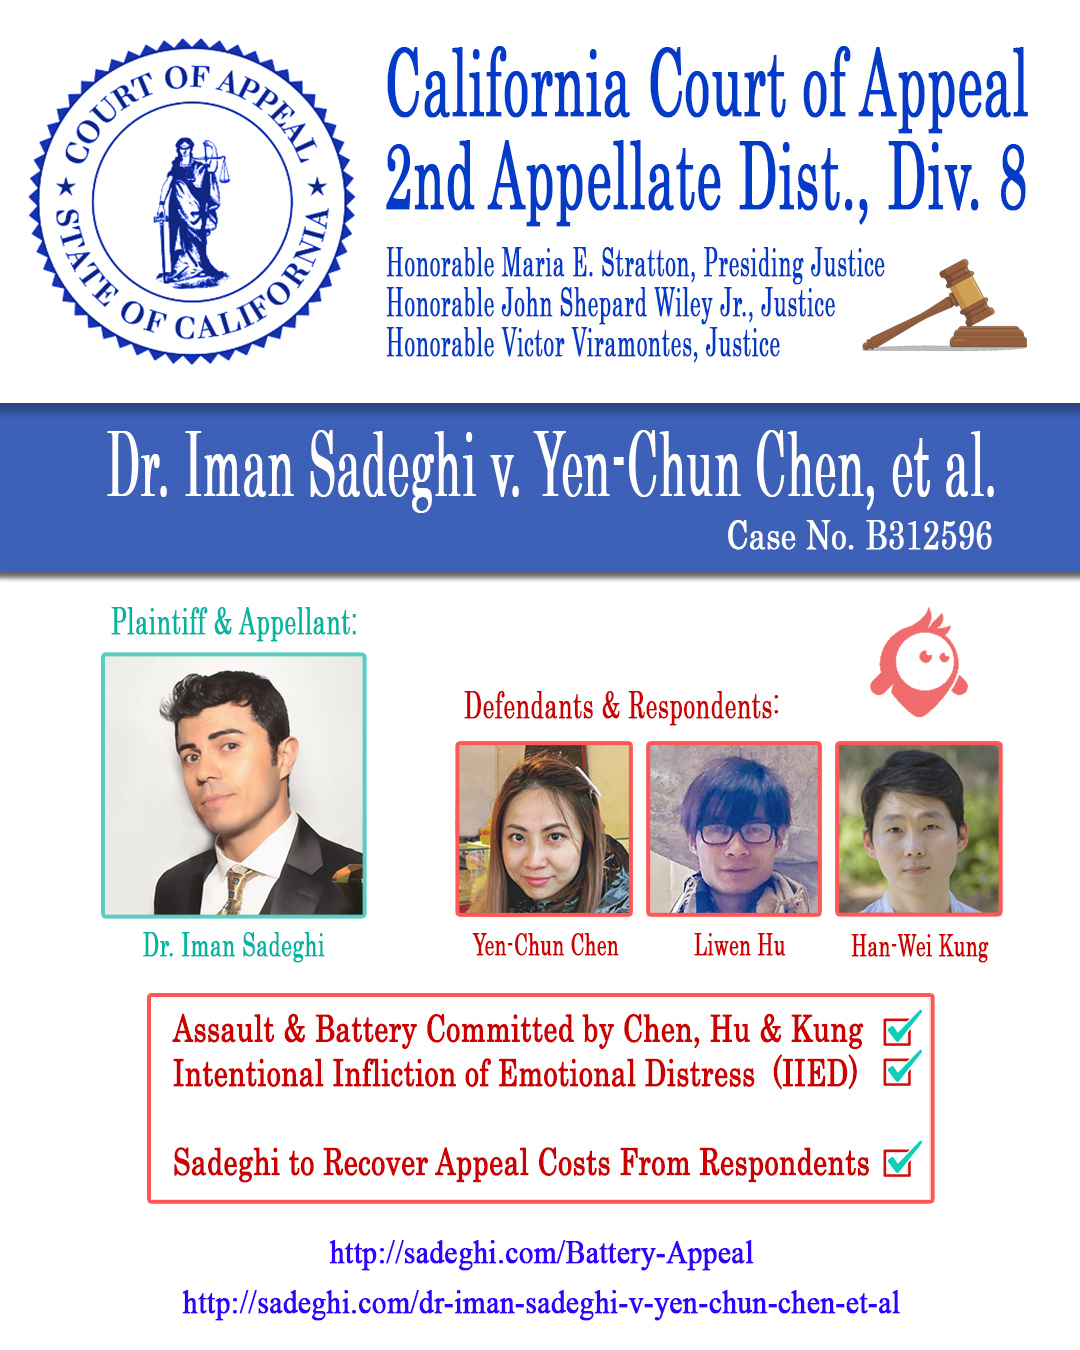 Appellate Court's Opinion Upholding Sadeghi's Claims for Battery and IIED Against Chen, Hu and Kung